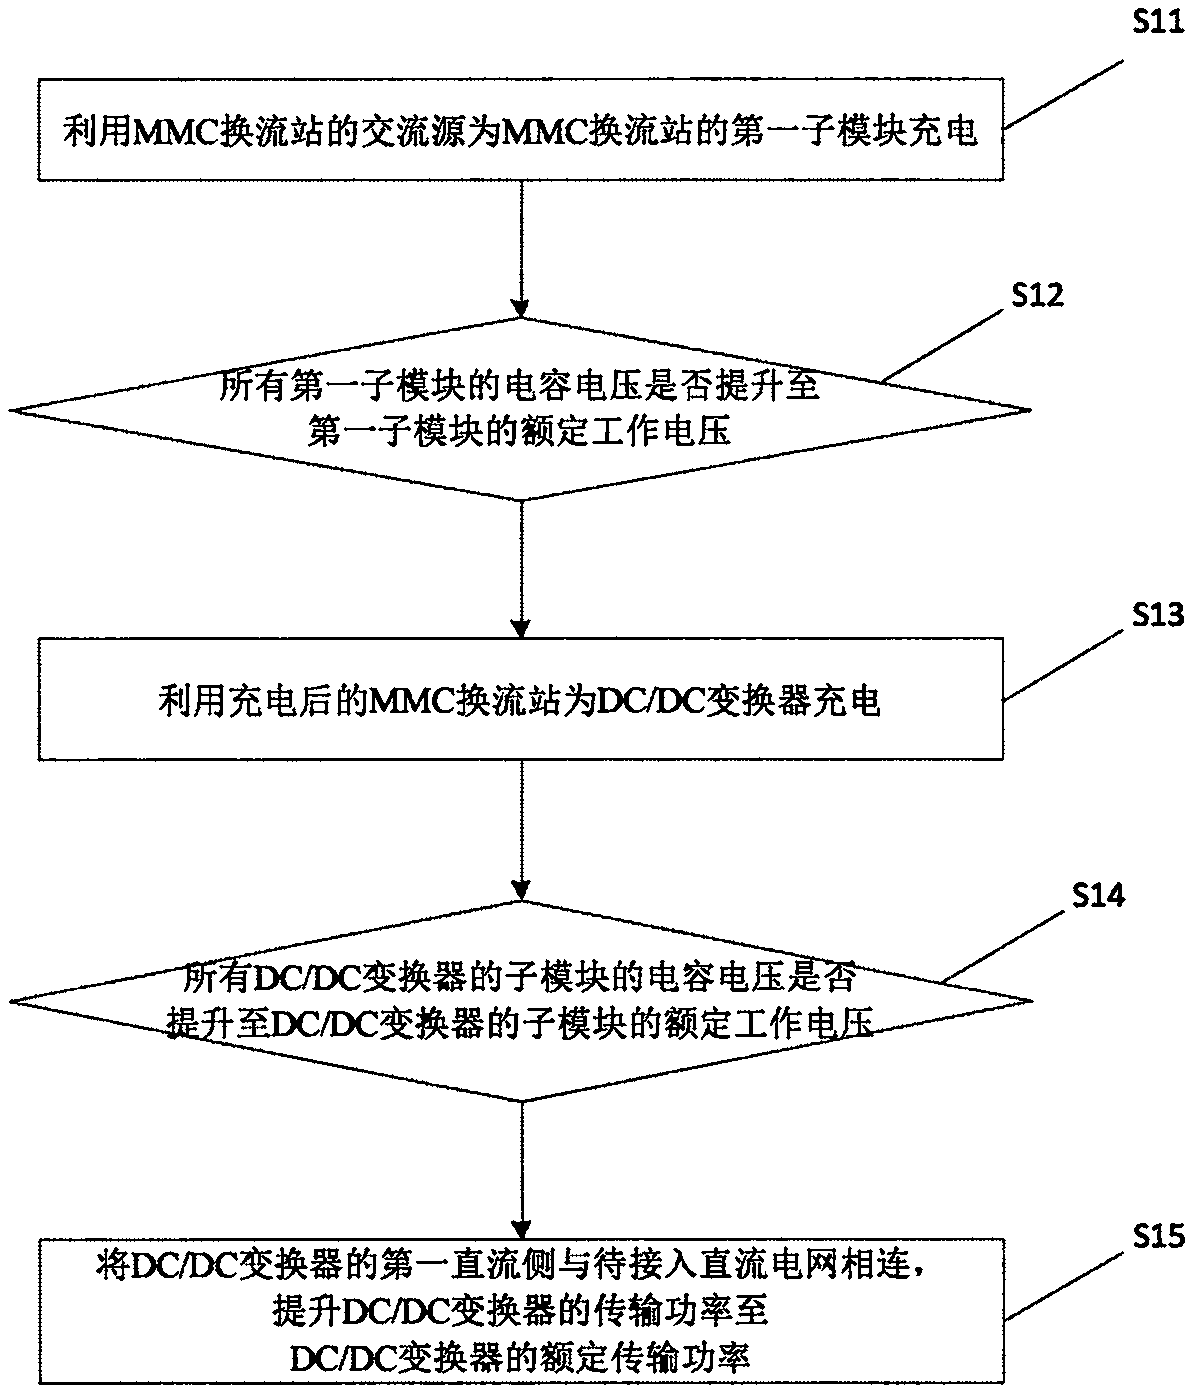 Control method for accessing modular multilevel converter (MMC) station to DC power grid and controller